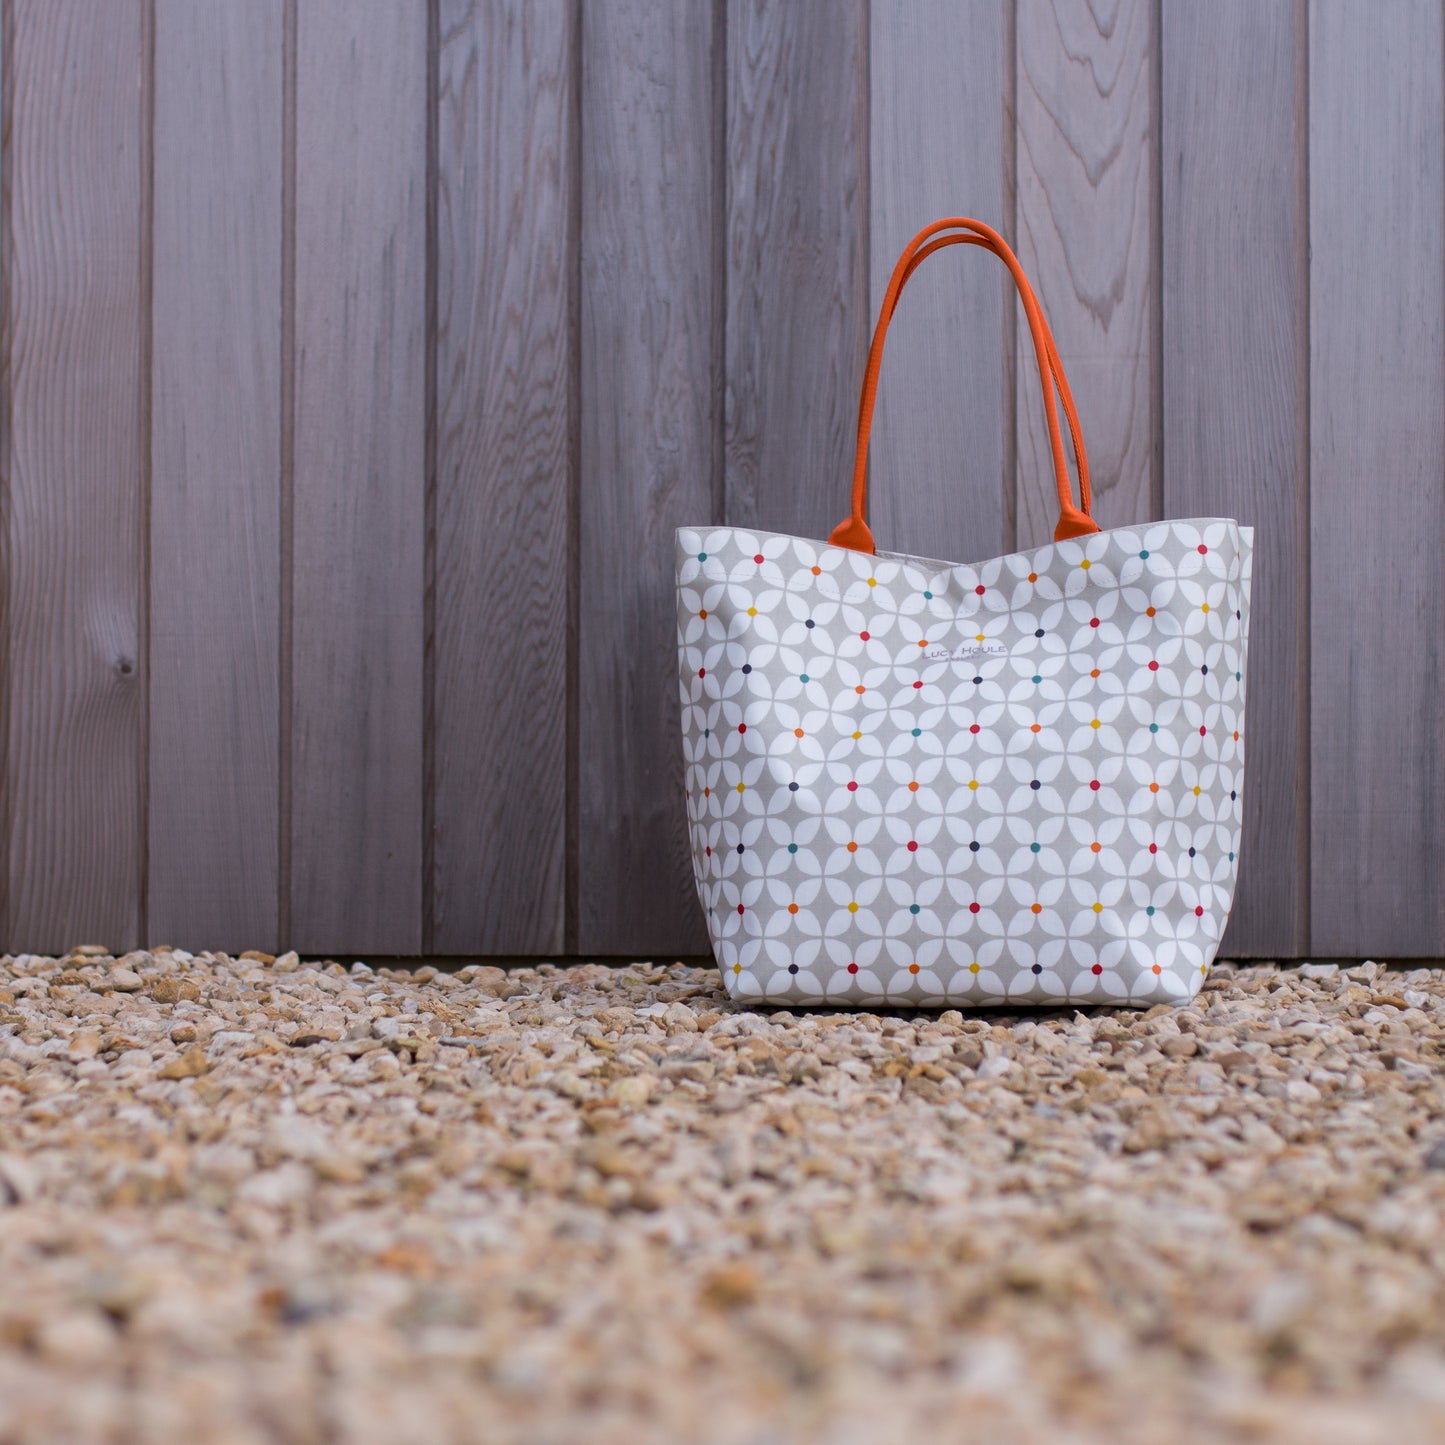 Modern Daisy Taupe Large Tote Bag with Orange Handles